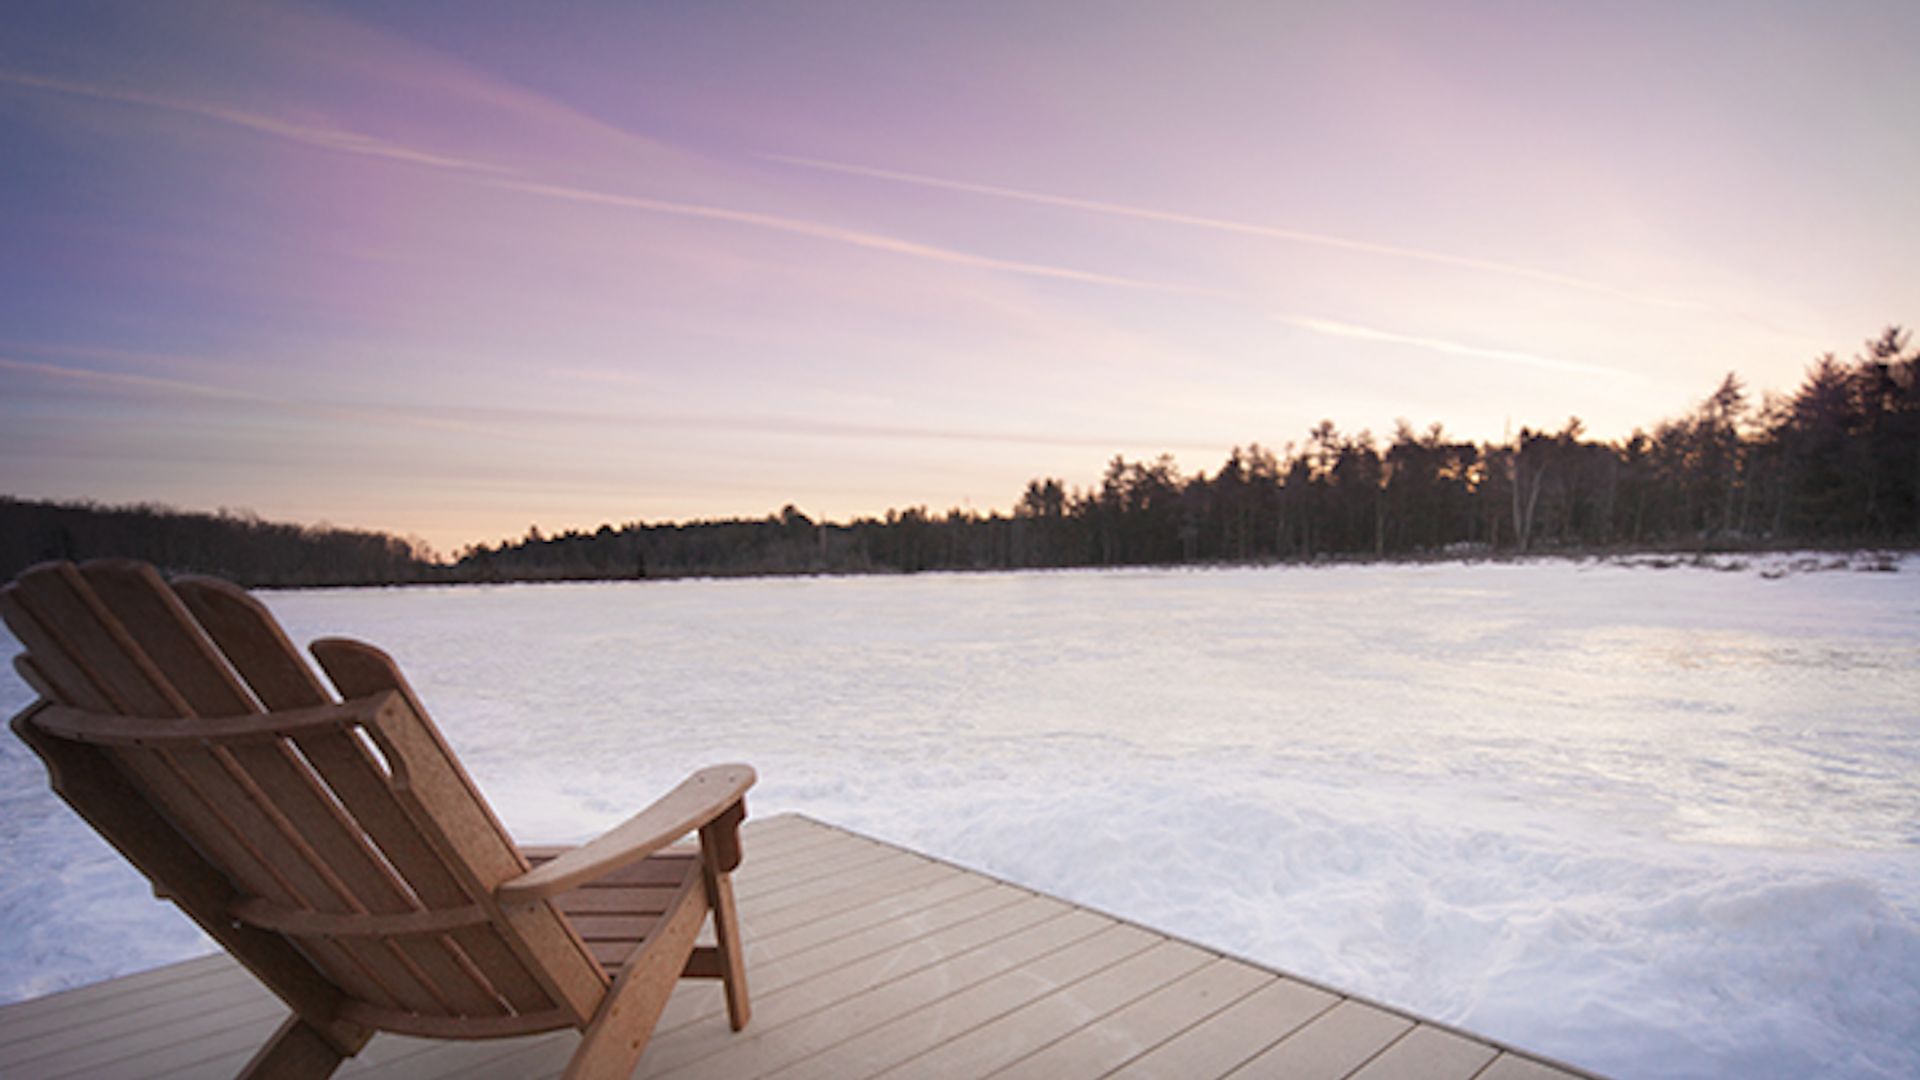 An Adirondack chair next to a frozen snow covered lake in Winter as the sun rises